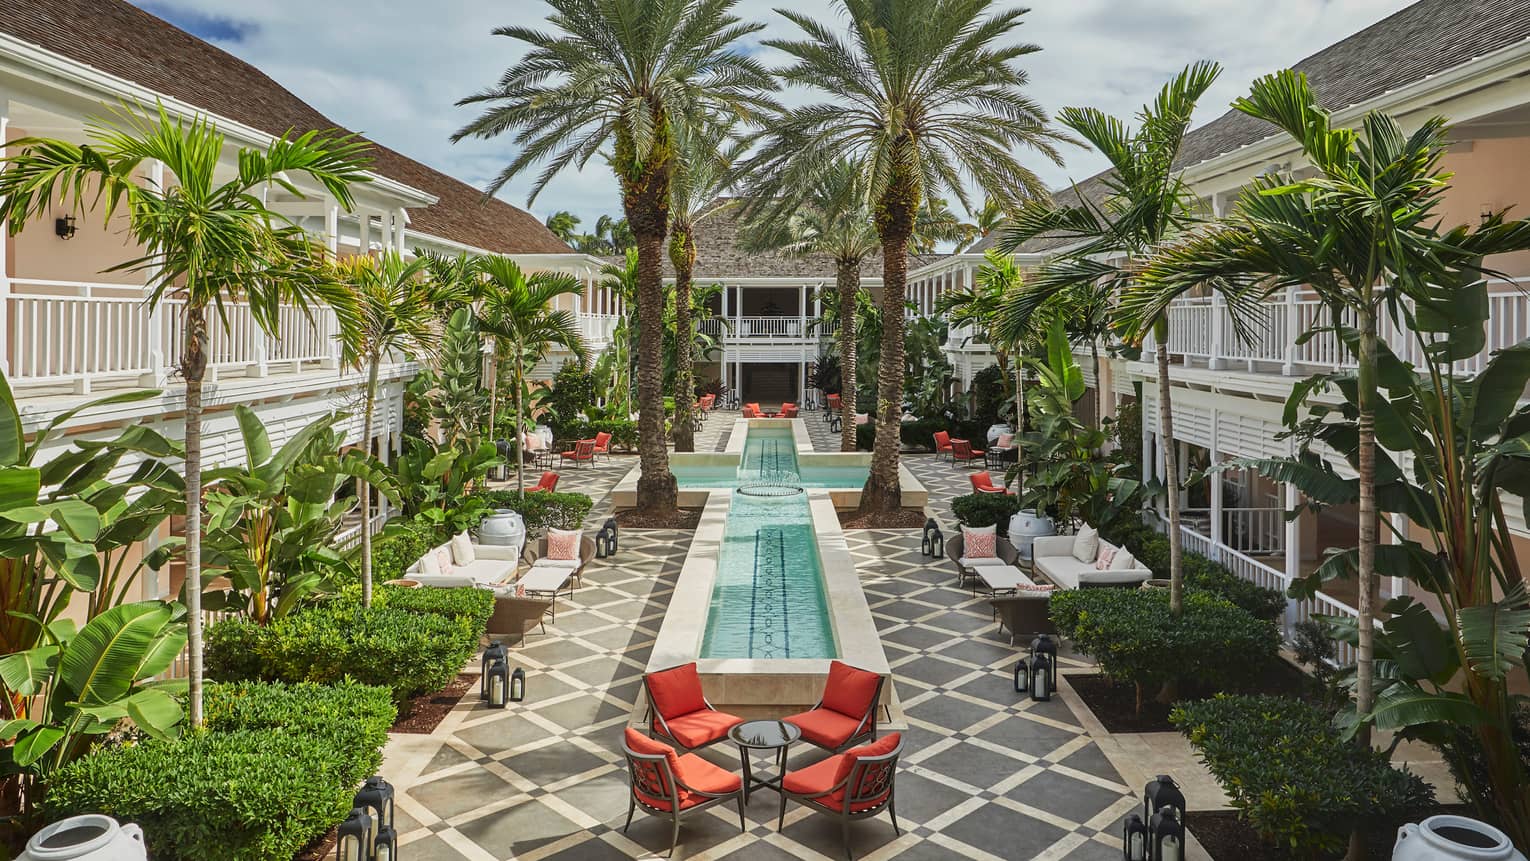 Patio chairs, tables around cross-shaped fountain, large palm trees in Hartford Courtyard